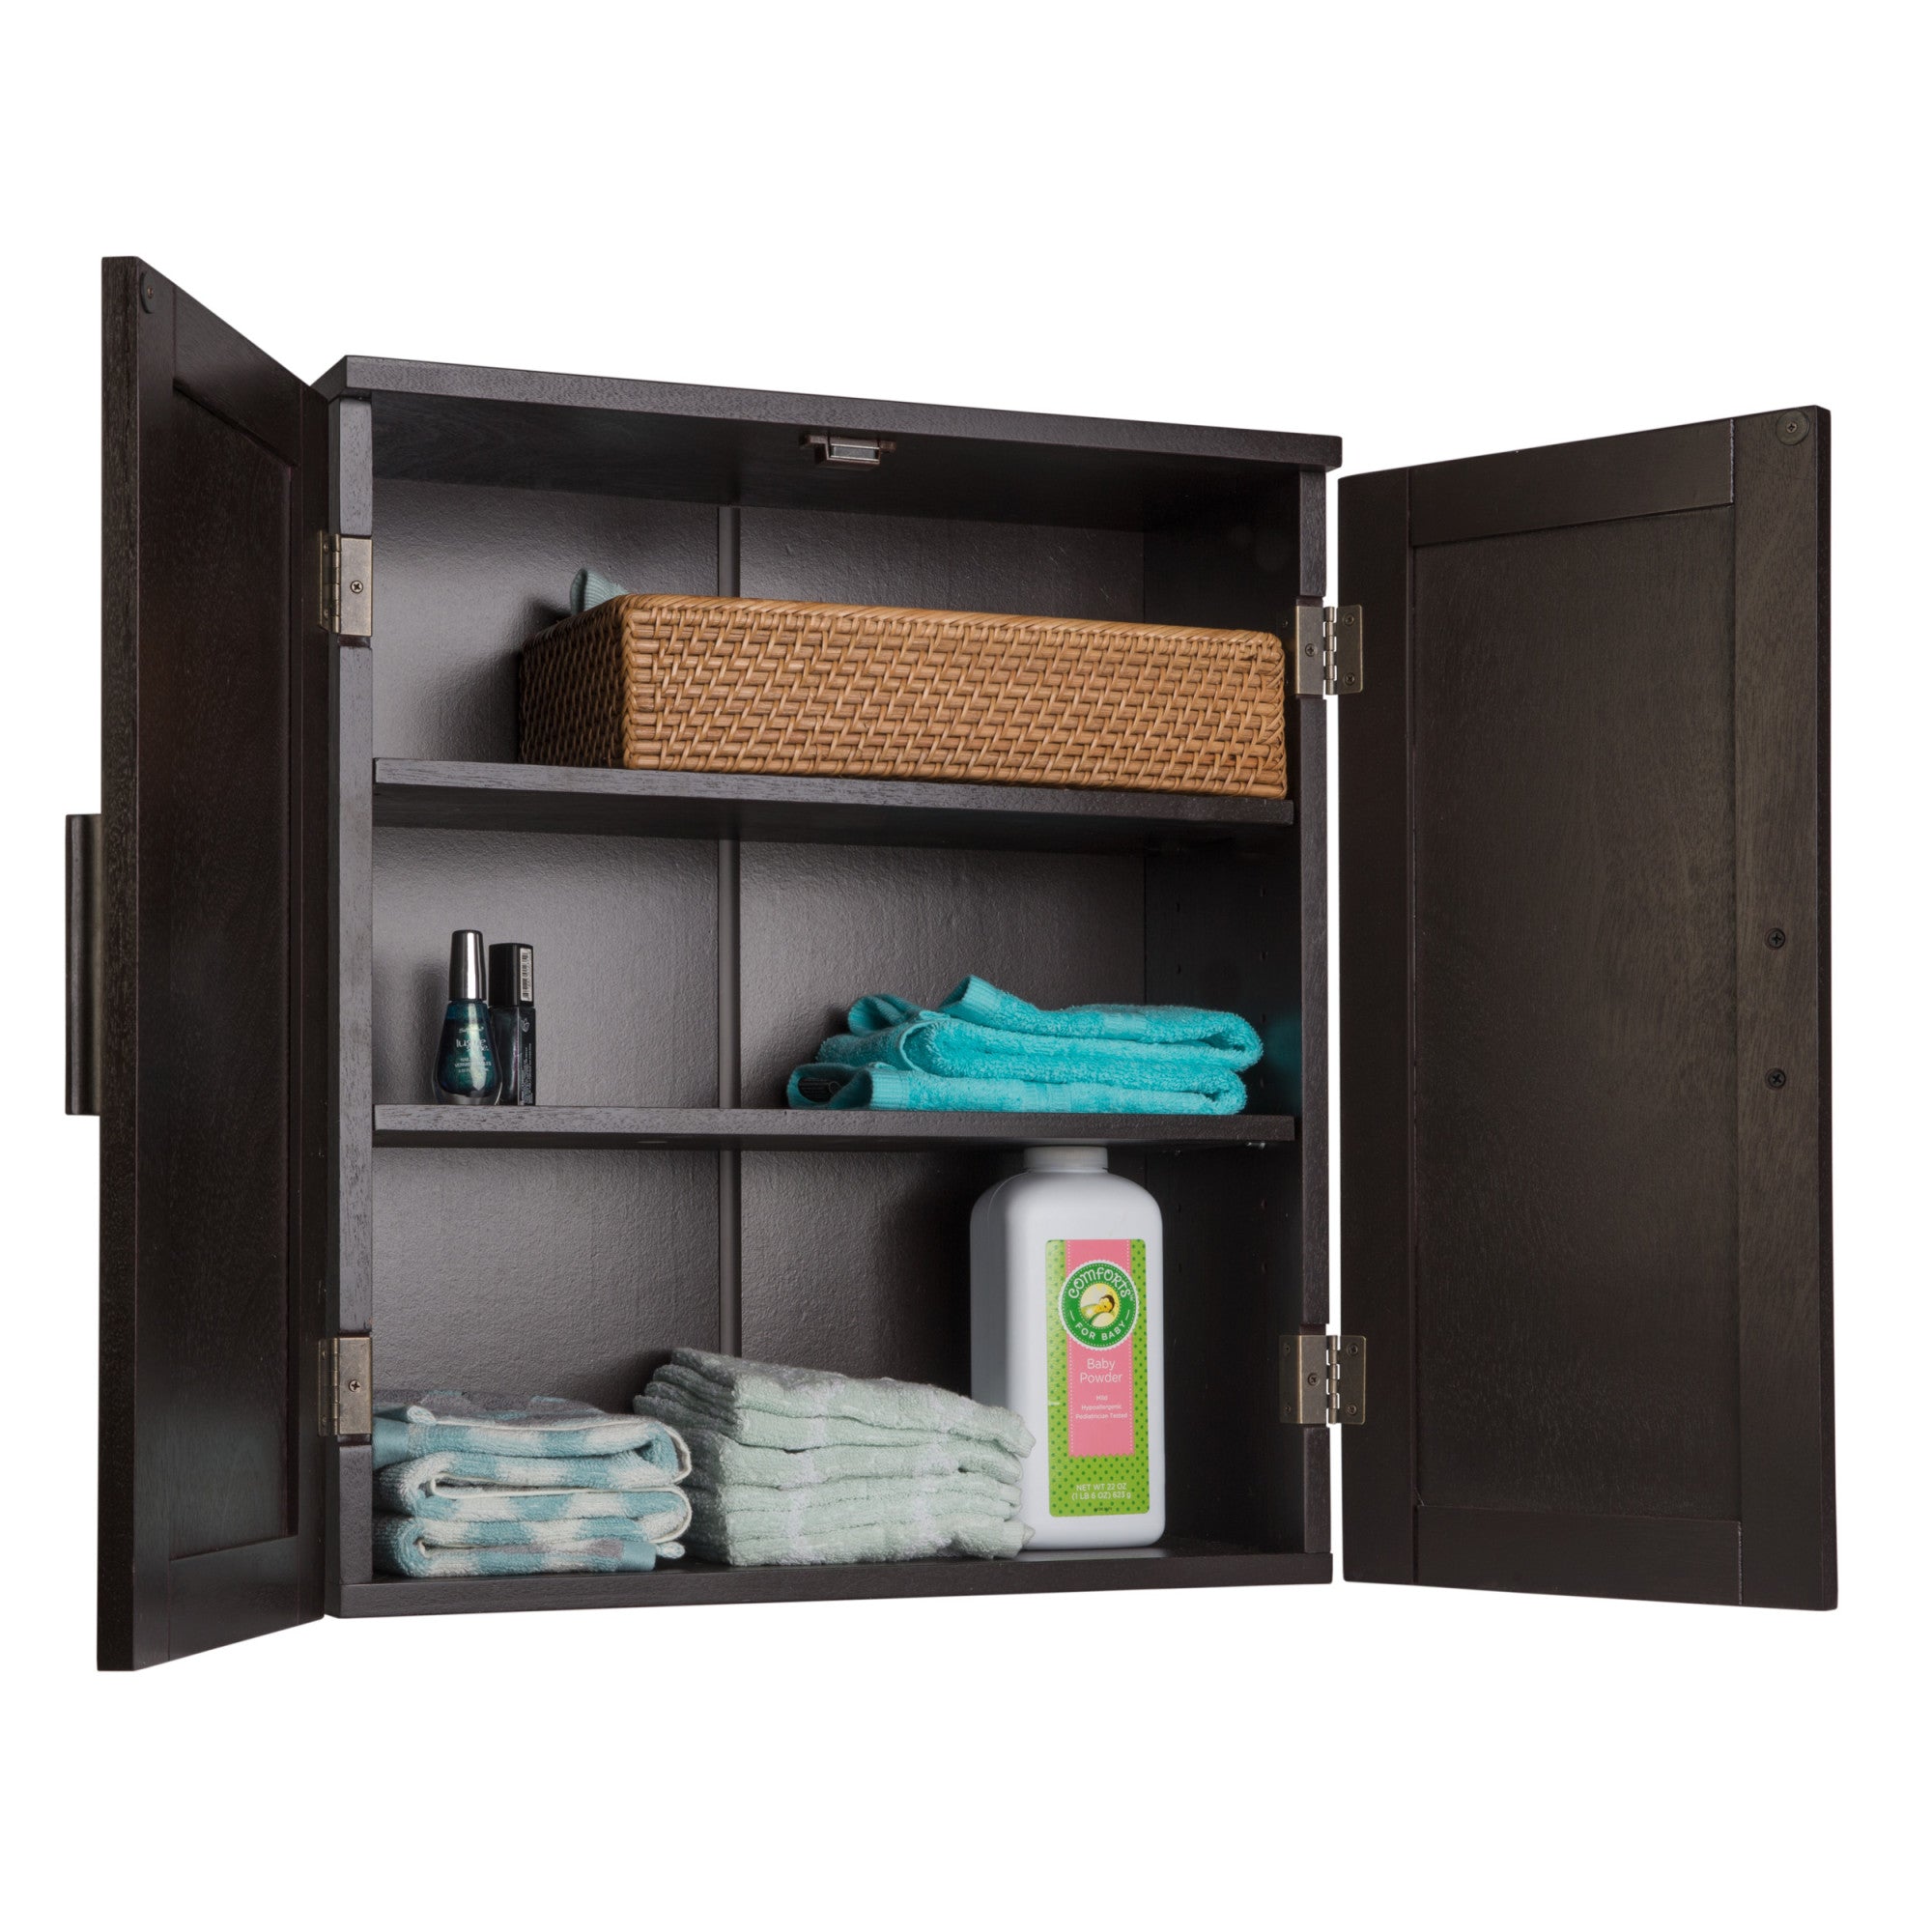 Elegant Home Fashions Catalina Removable Wooden Wall Cabinet with 2 Doors- Espresso